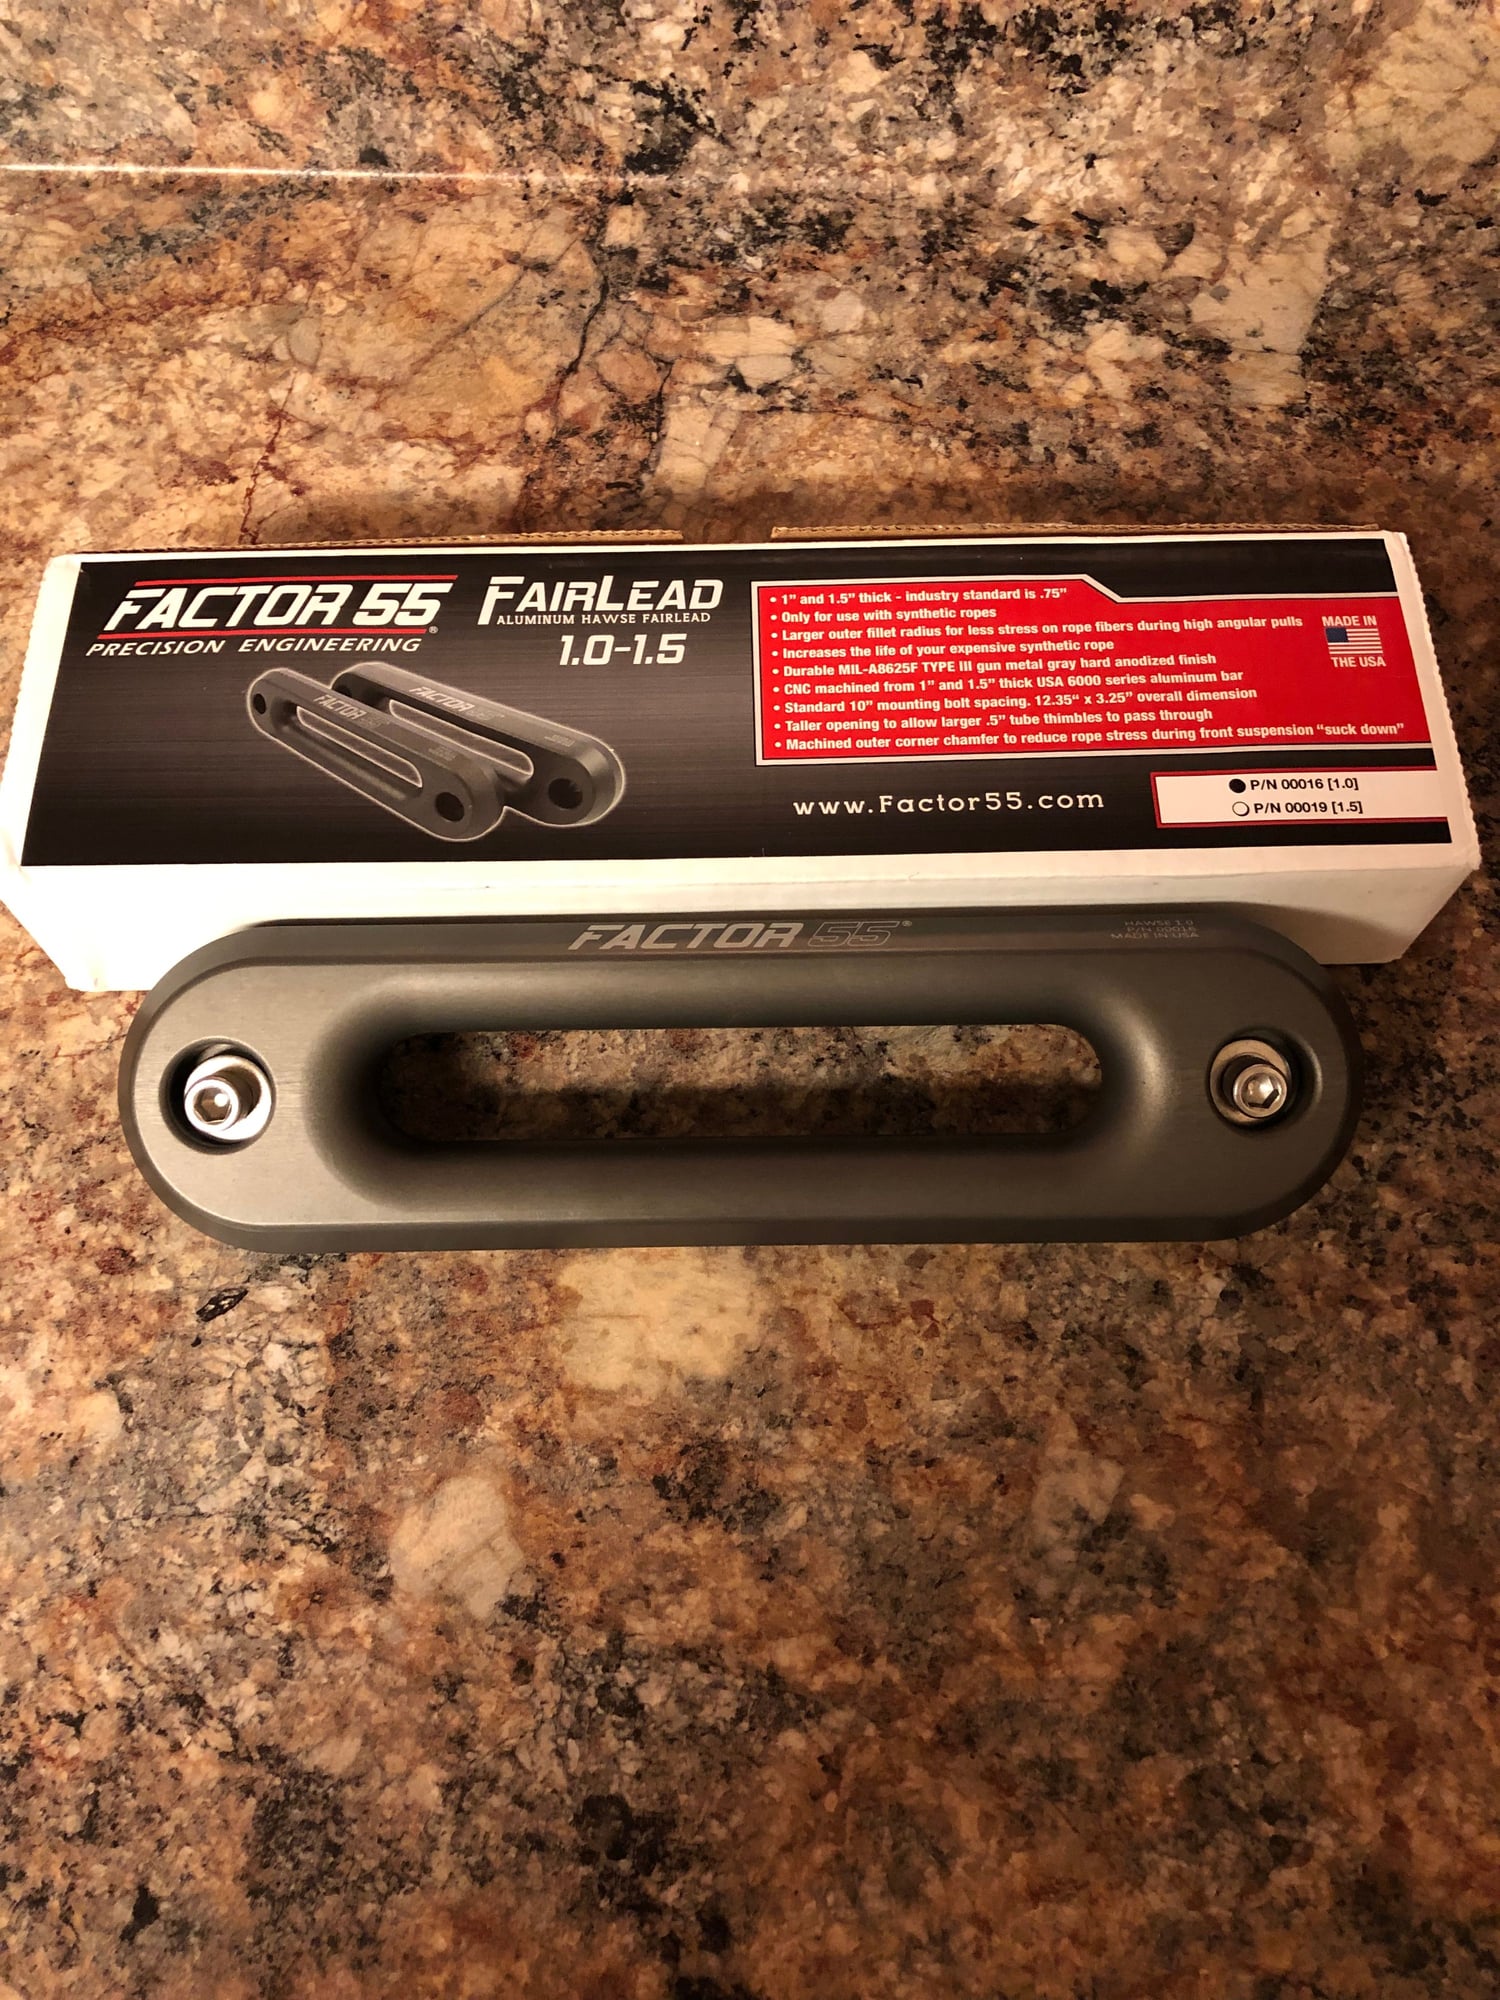 Miscellaneous - Factor 55 1.0 Fairlead - New - All Years Any Make All Models - Mantachie, MS 38855, United States